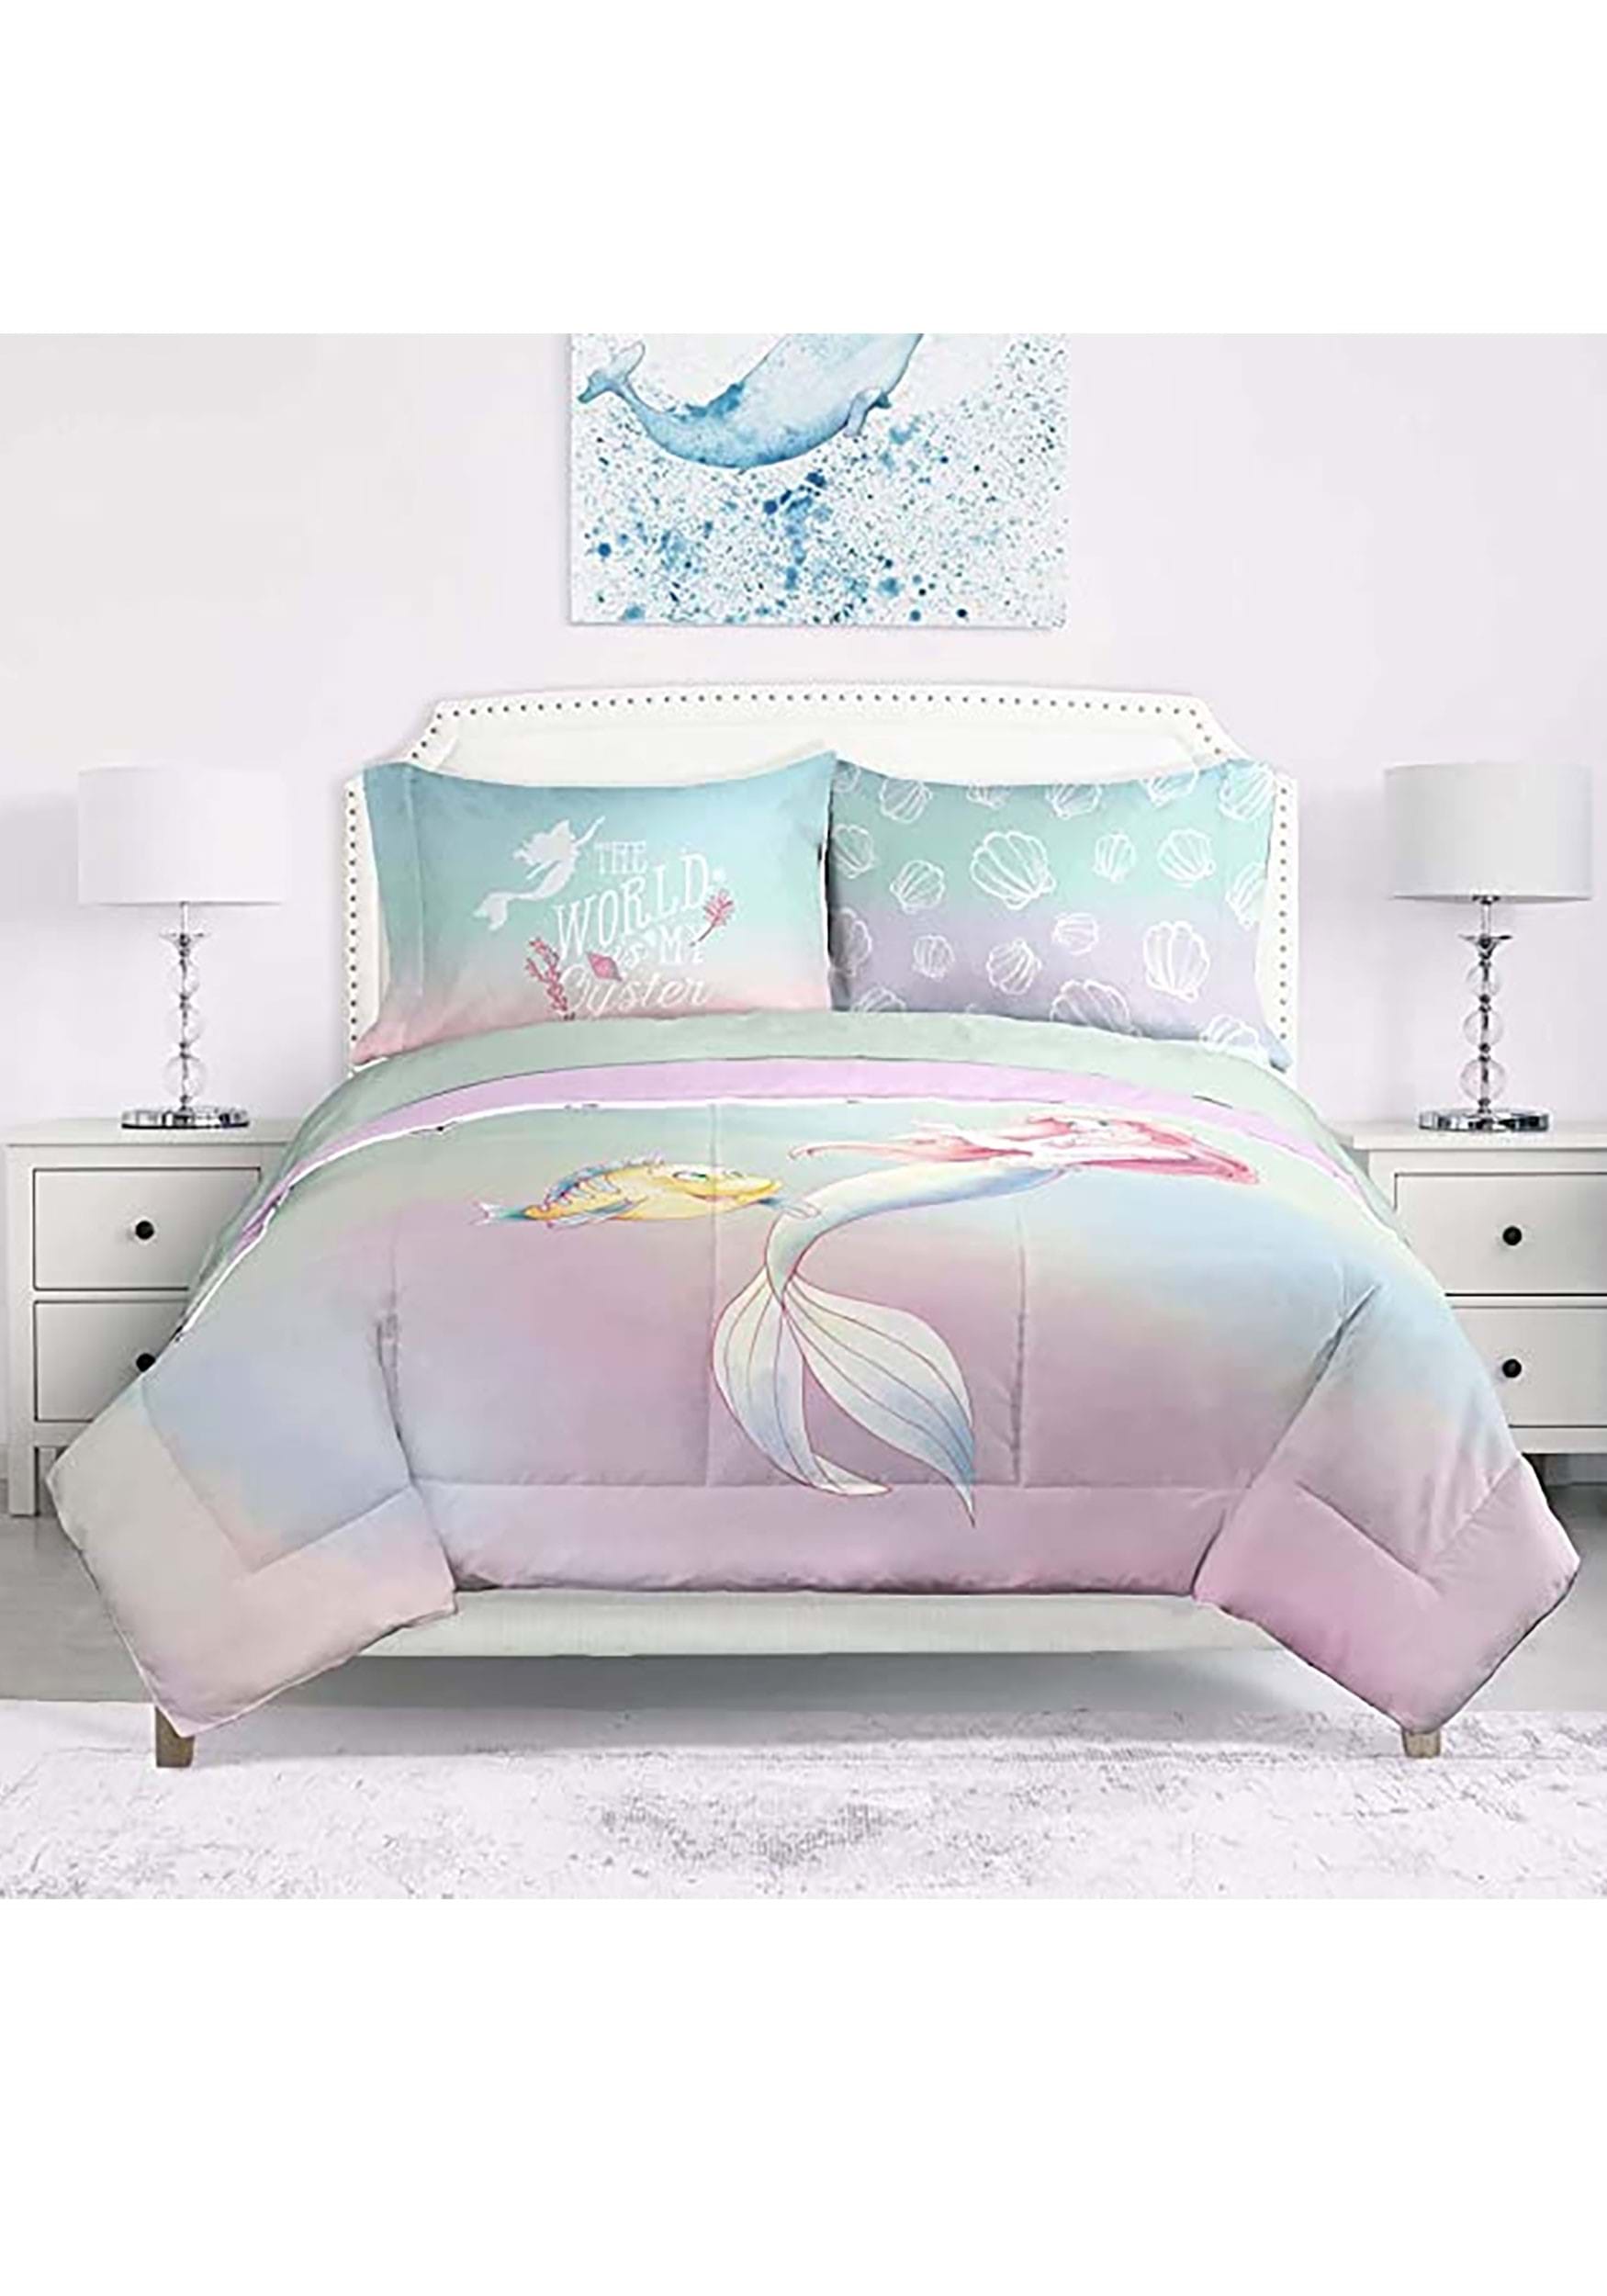 https://images.fun.com/products/85132/2-1-275702/little-mermaid-full-comforter-and-pillow-case-set-alt-4.jpg